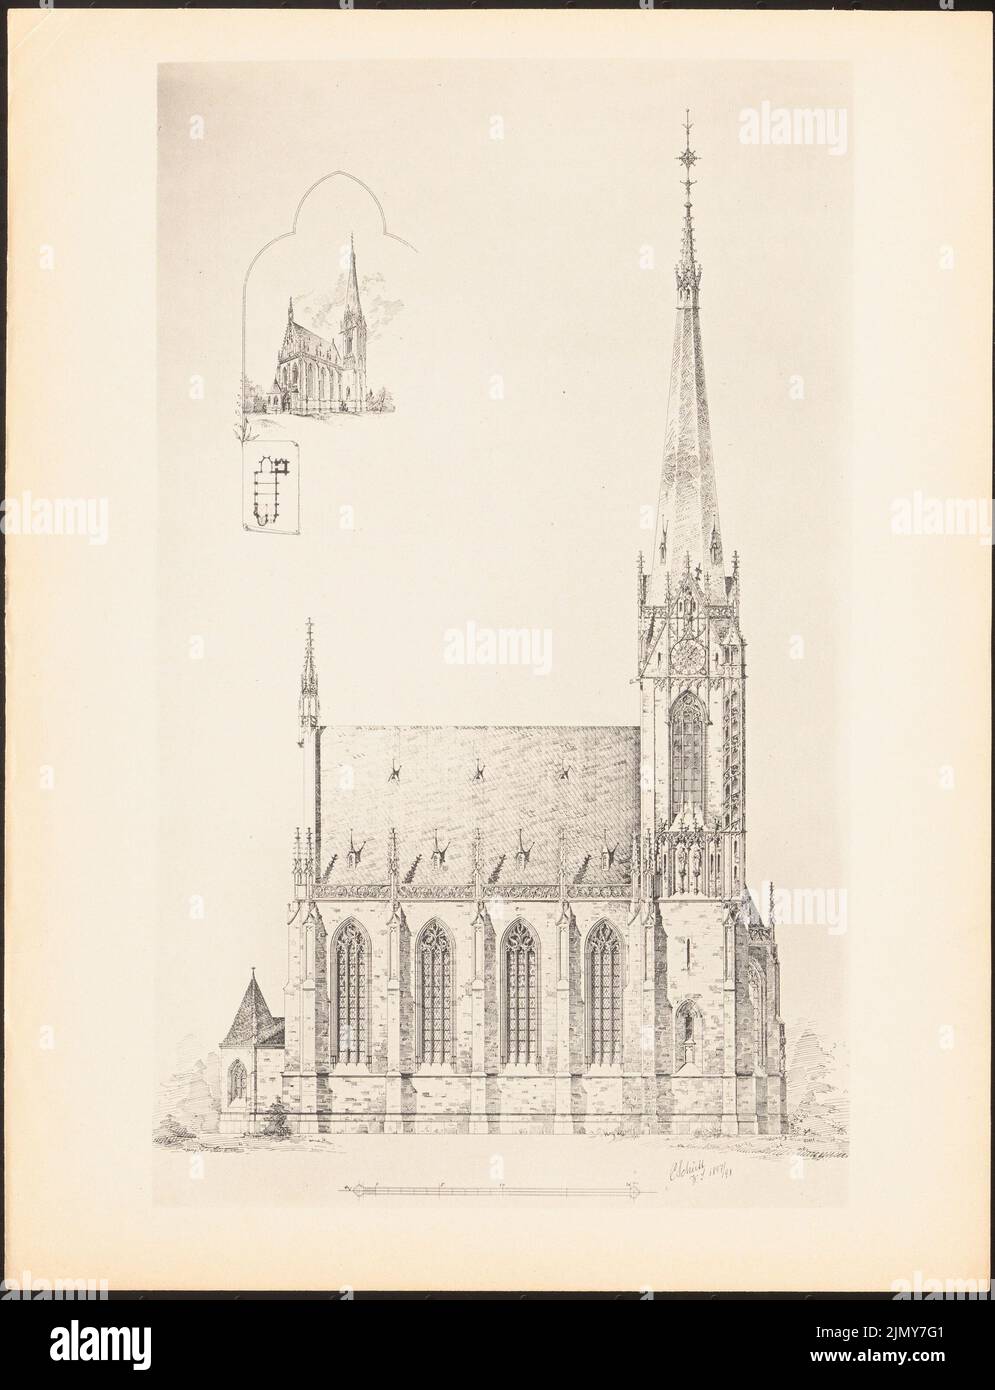 Schütt C., church. (From: Prints of seminar works by the Royal Technical University of Berlin, Vol. I) (1890-1902): floor plan, perspective view, view. Print on paper, 33 x 25.3 cm (including scan edges) Stock Photo